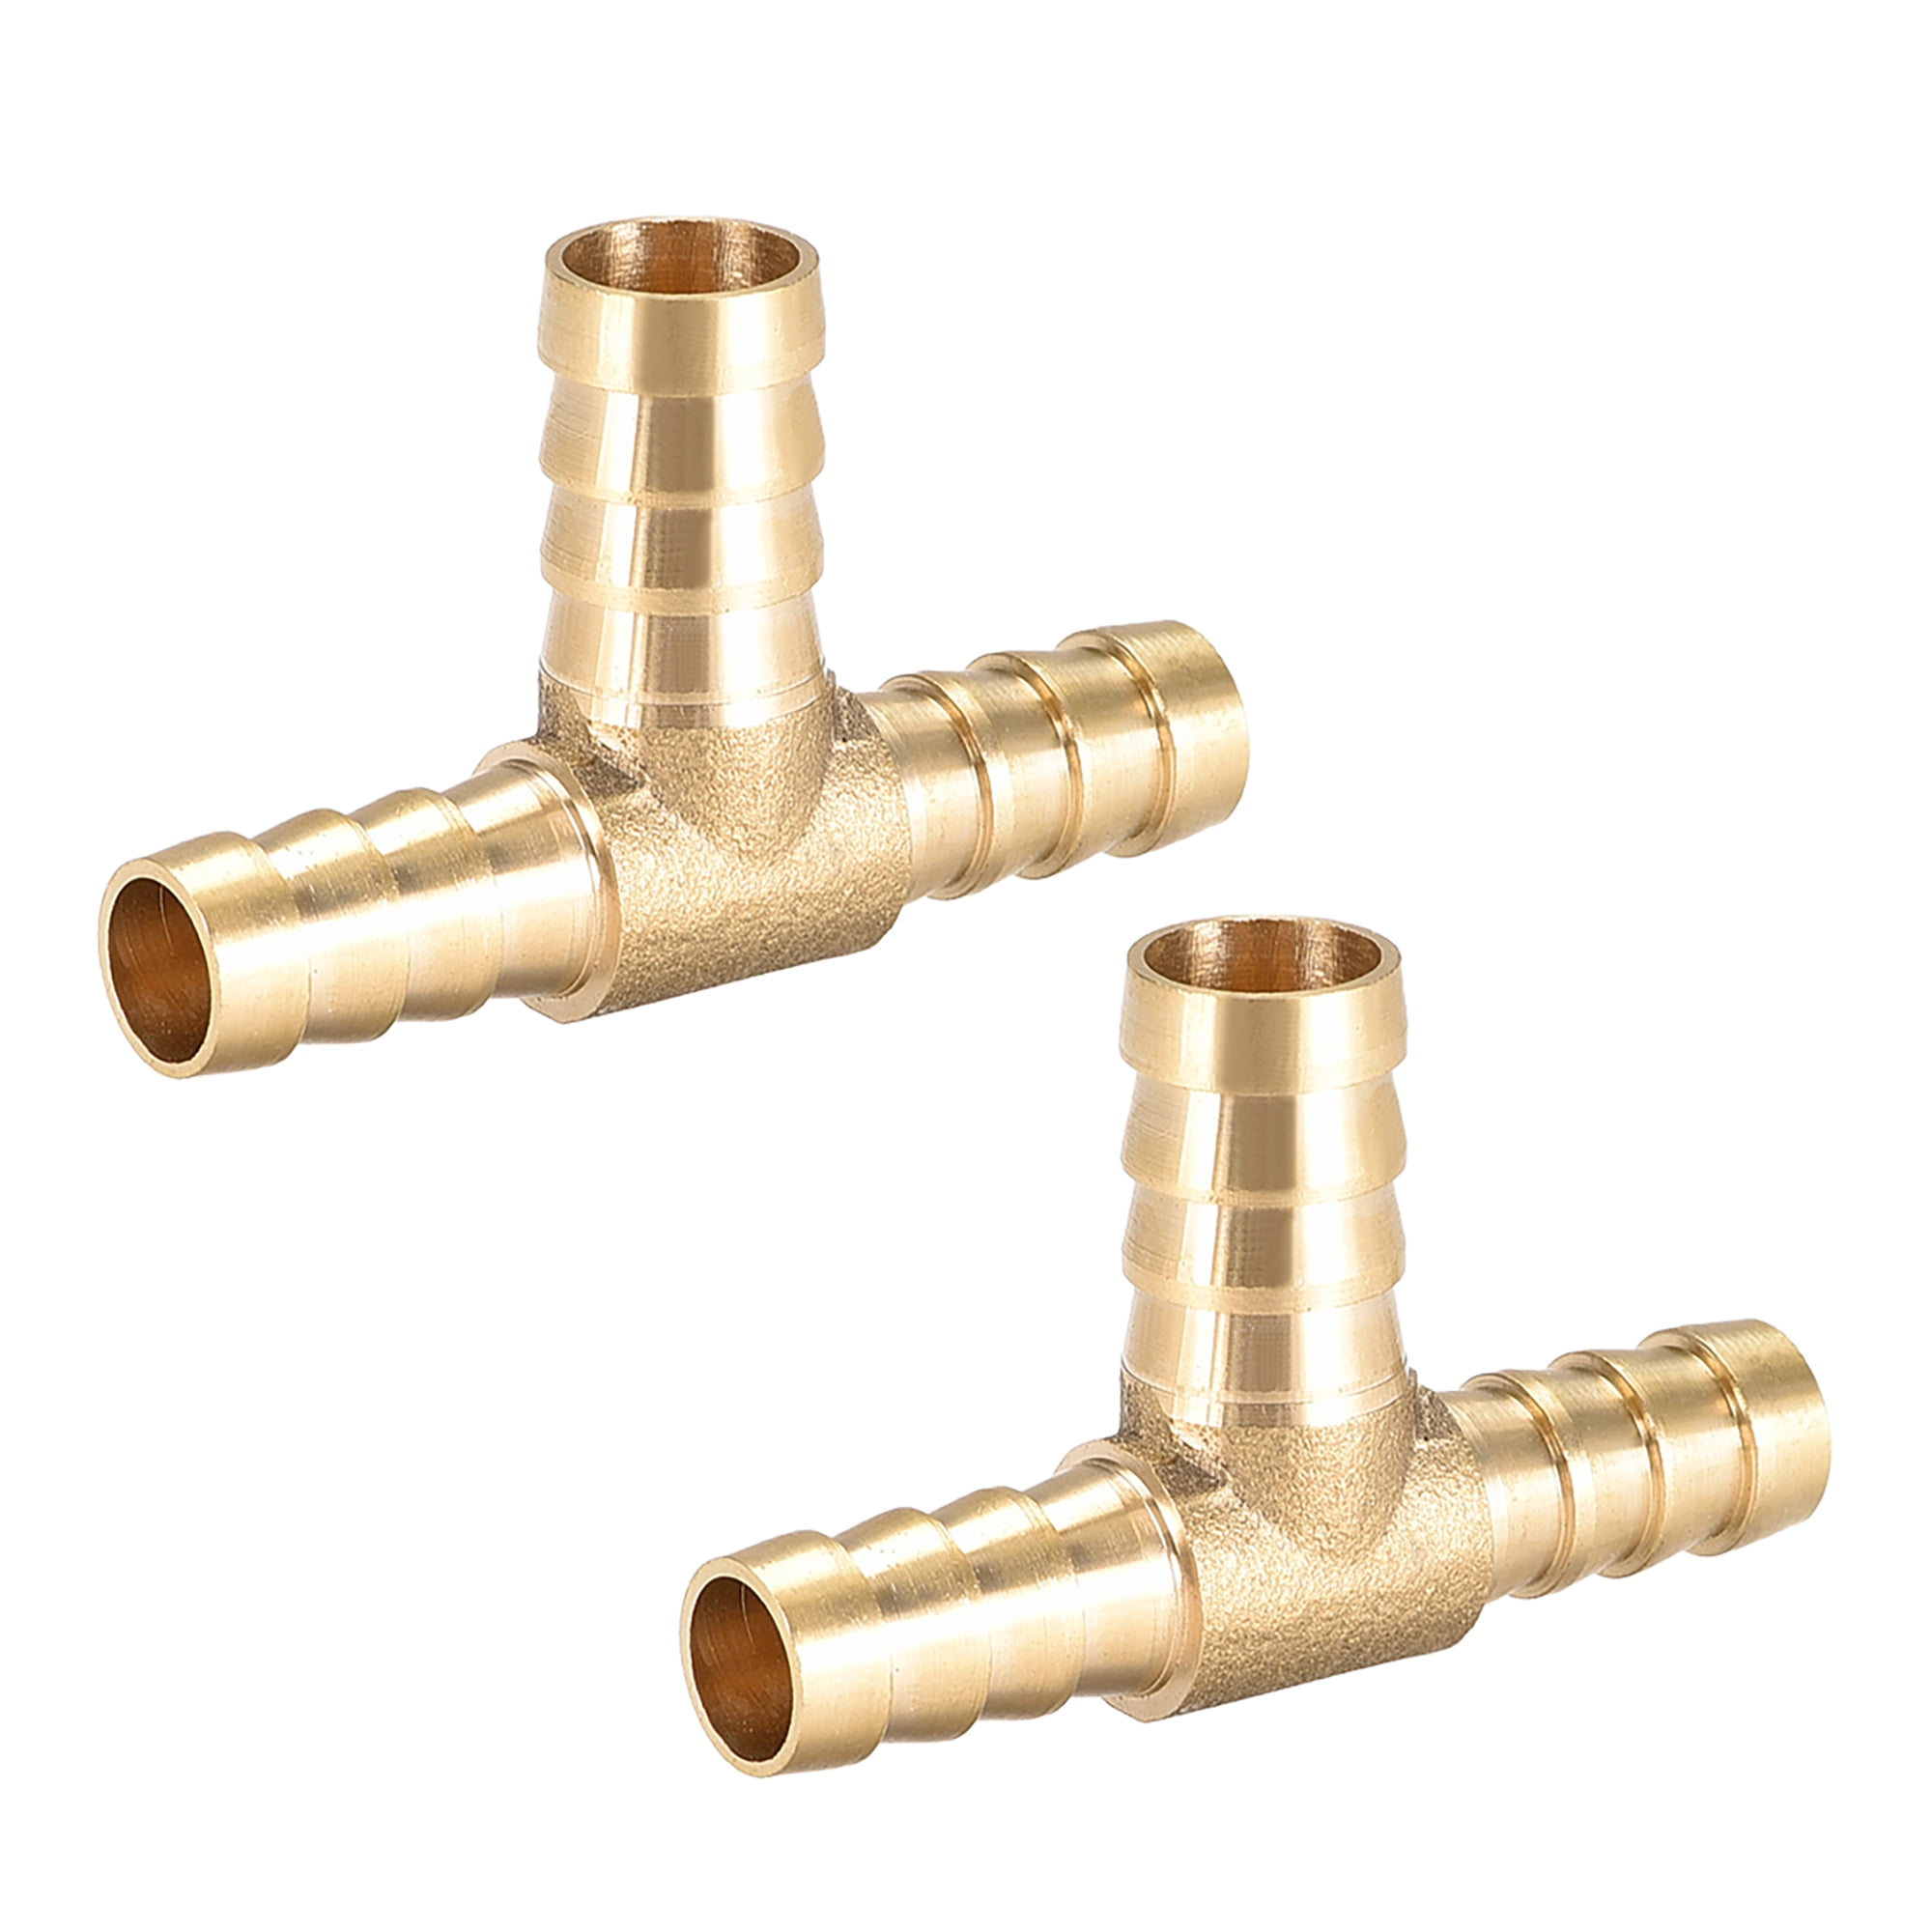 Brass 'T' 3 way Hose Joiner Barbed Connector Air Fuel Water Pipe Tubing 